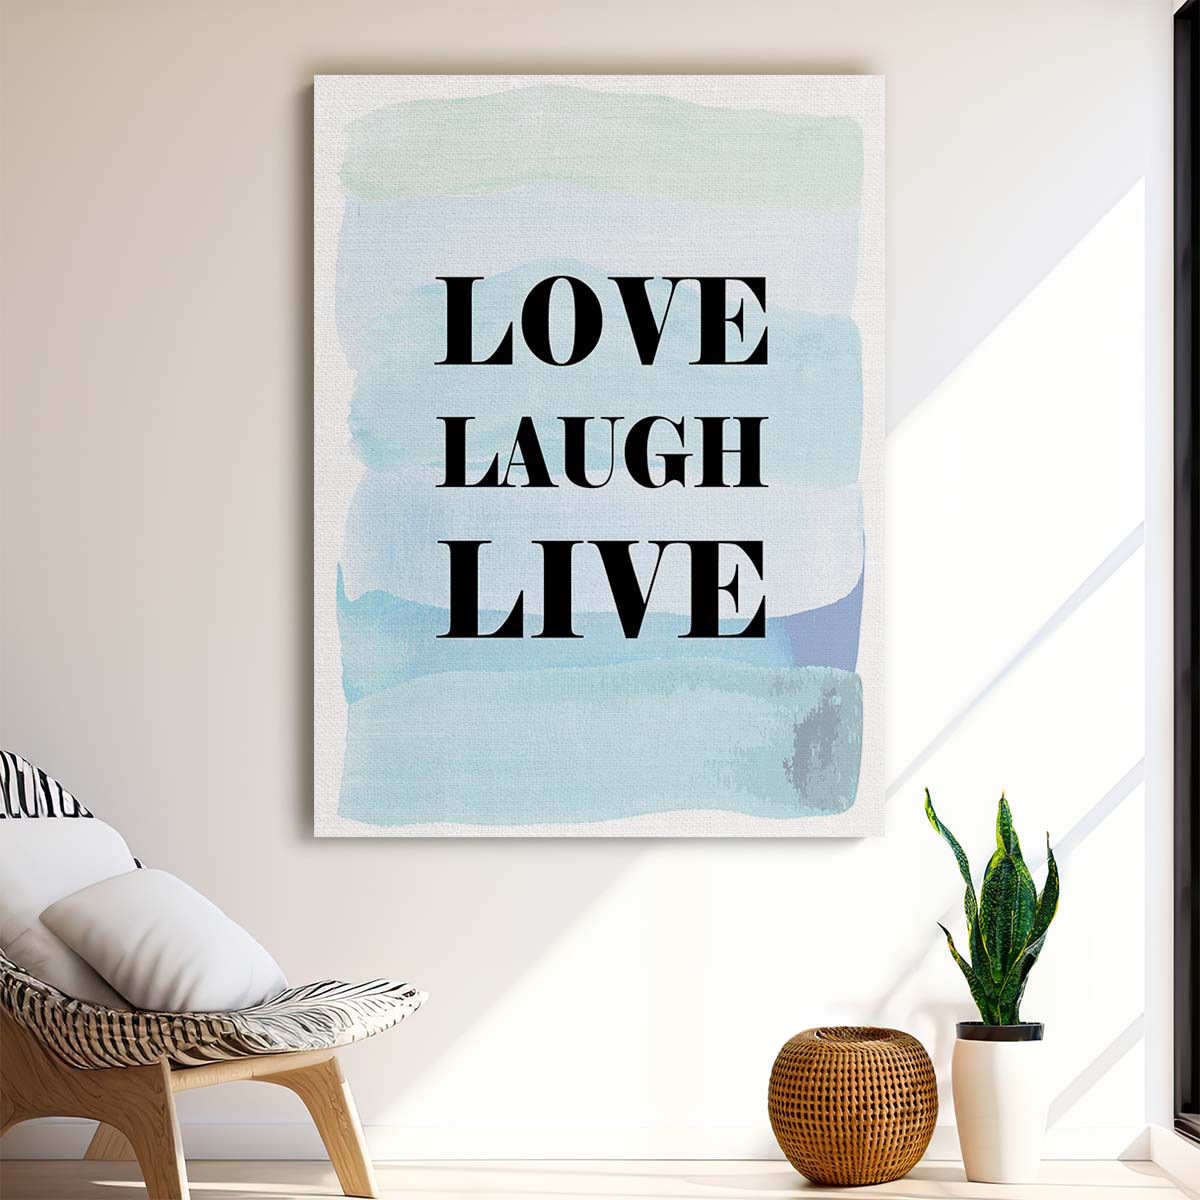 Love, Laugh, Live Inspirational Quote Blue Illustration Wall Art by Luxuriance Designs, made in USA